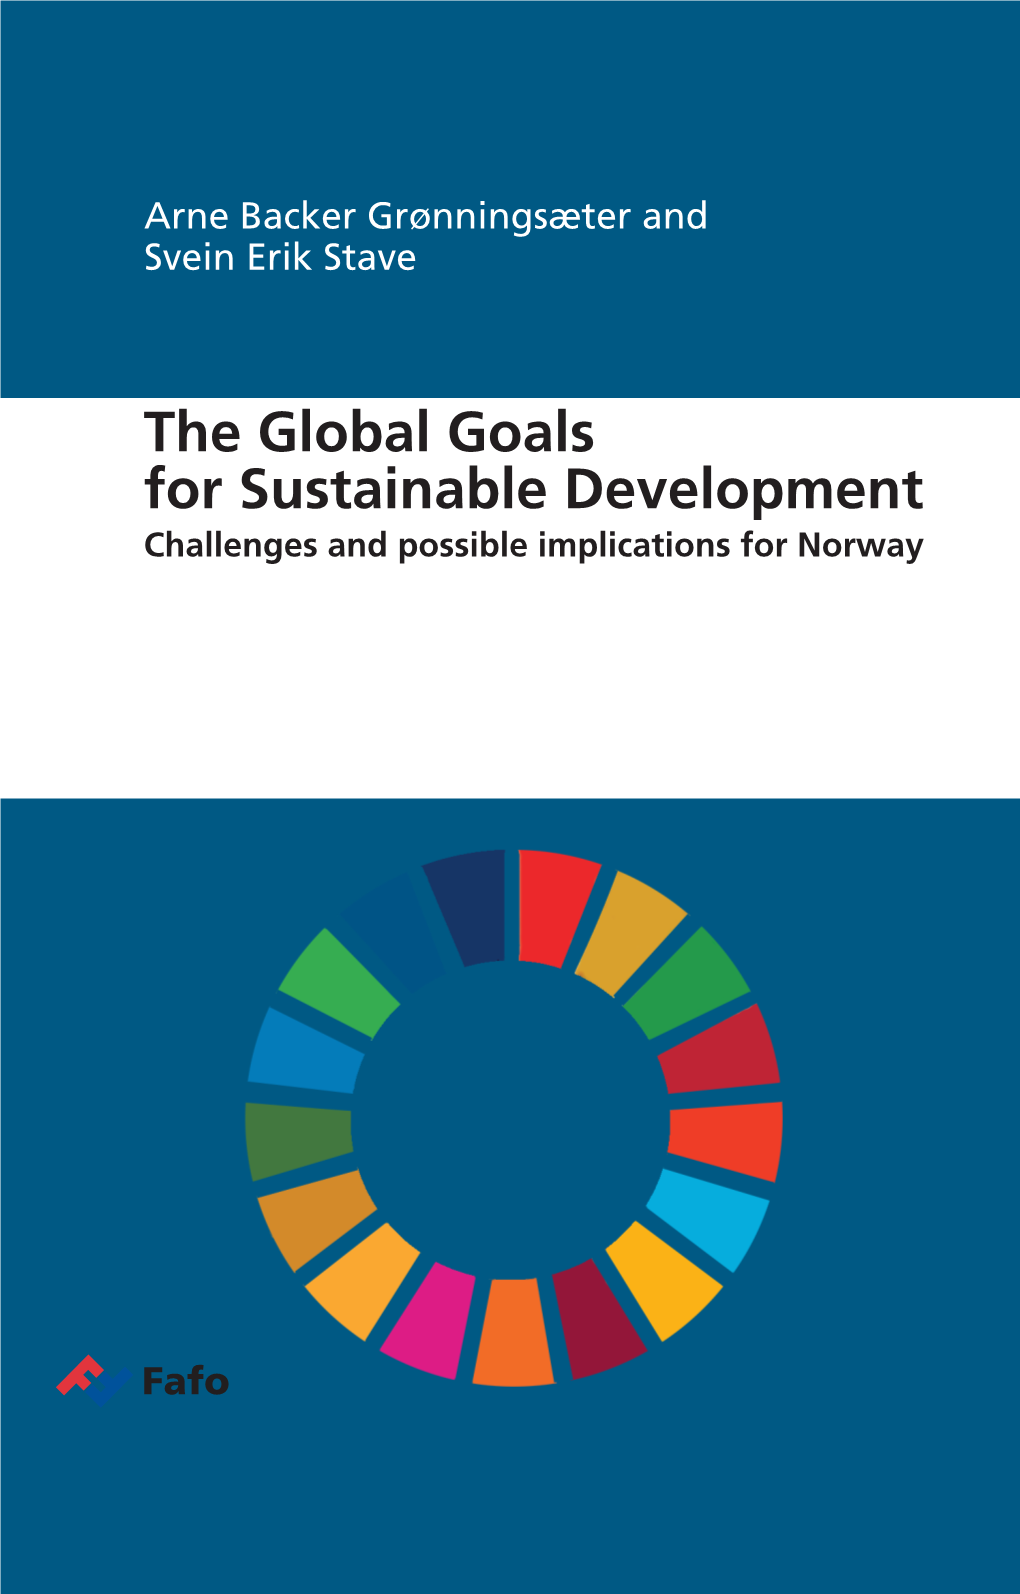 The Global Goals for Sustainable Development Challenges and Possible Implications for Norway